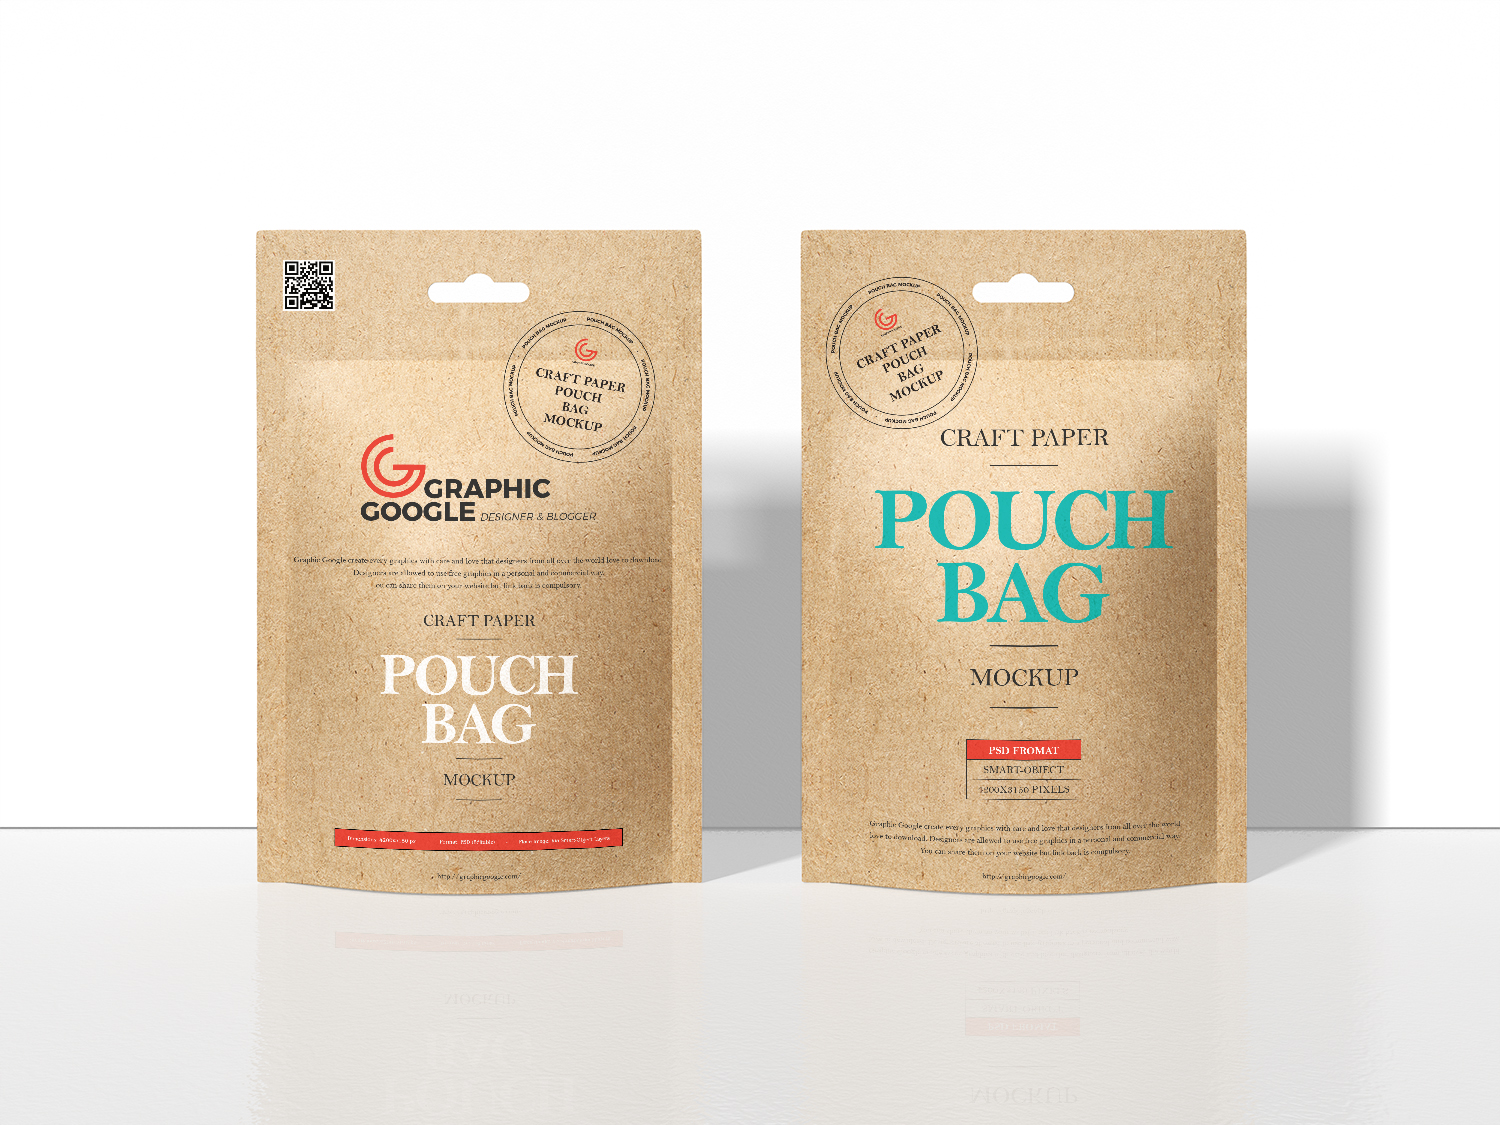 Free Craft Paper Pouch Bag Mockup